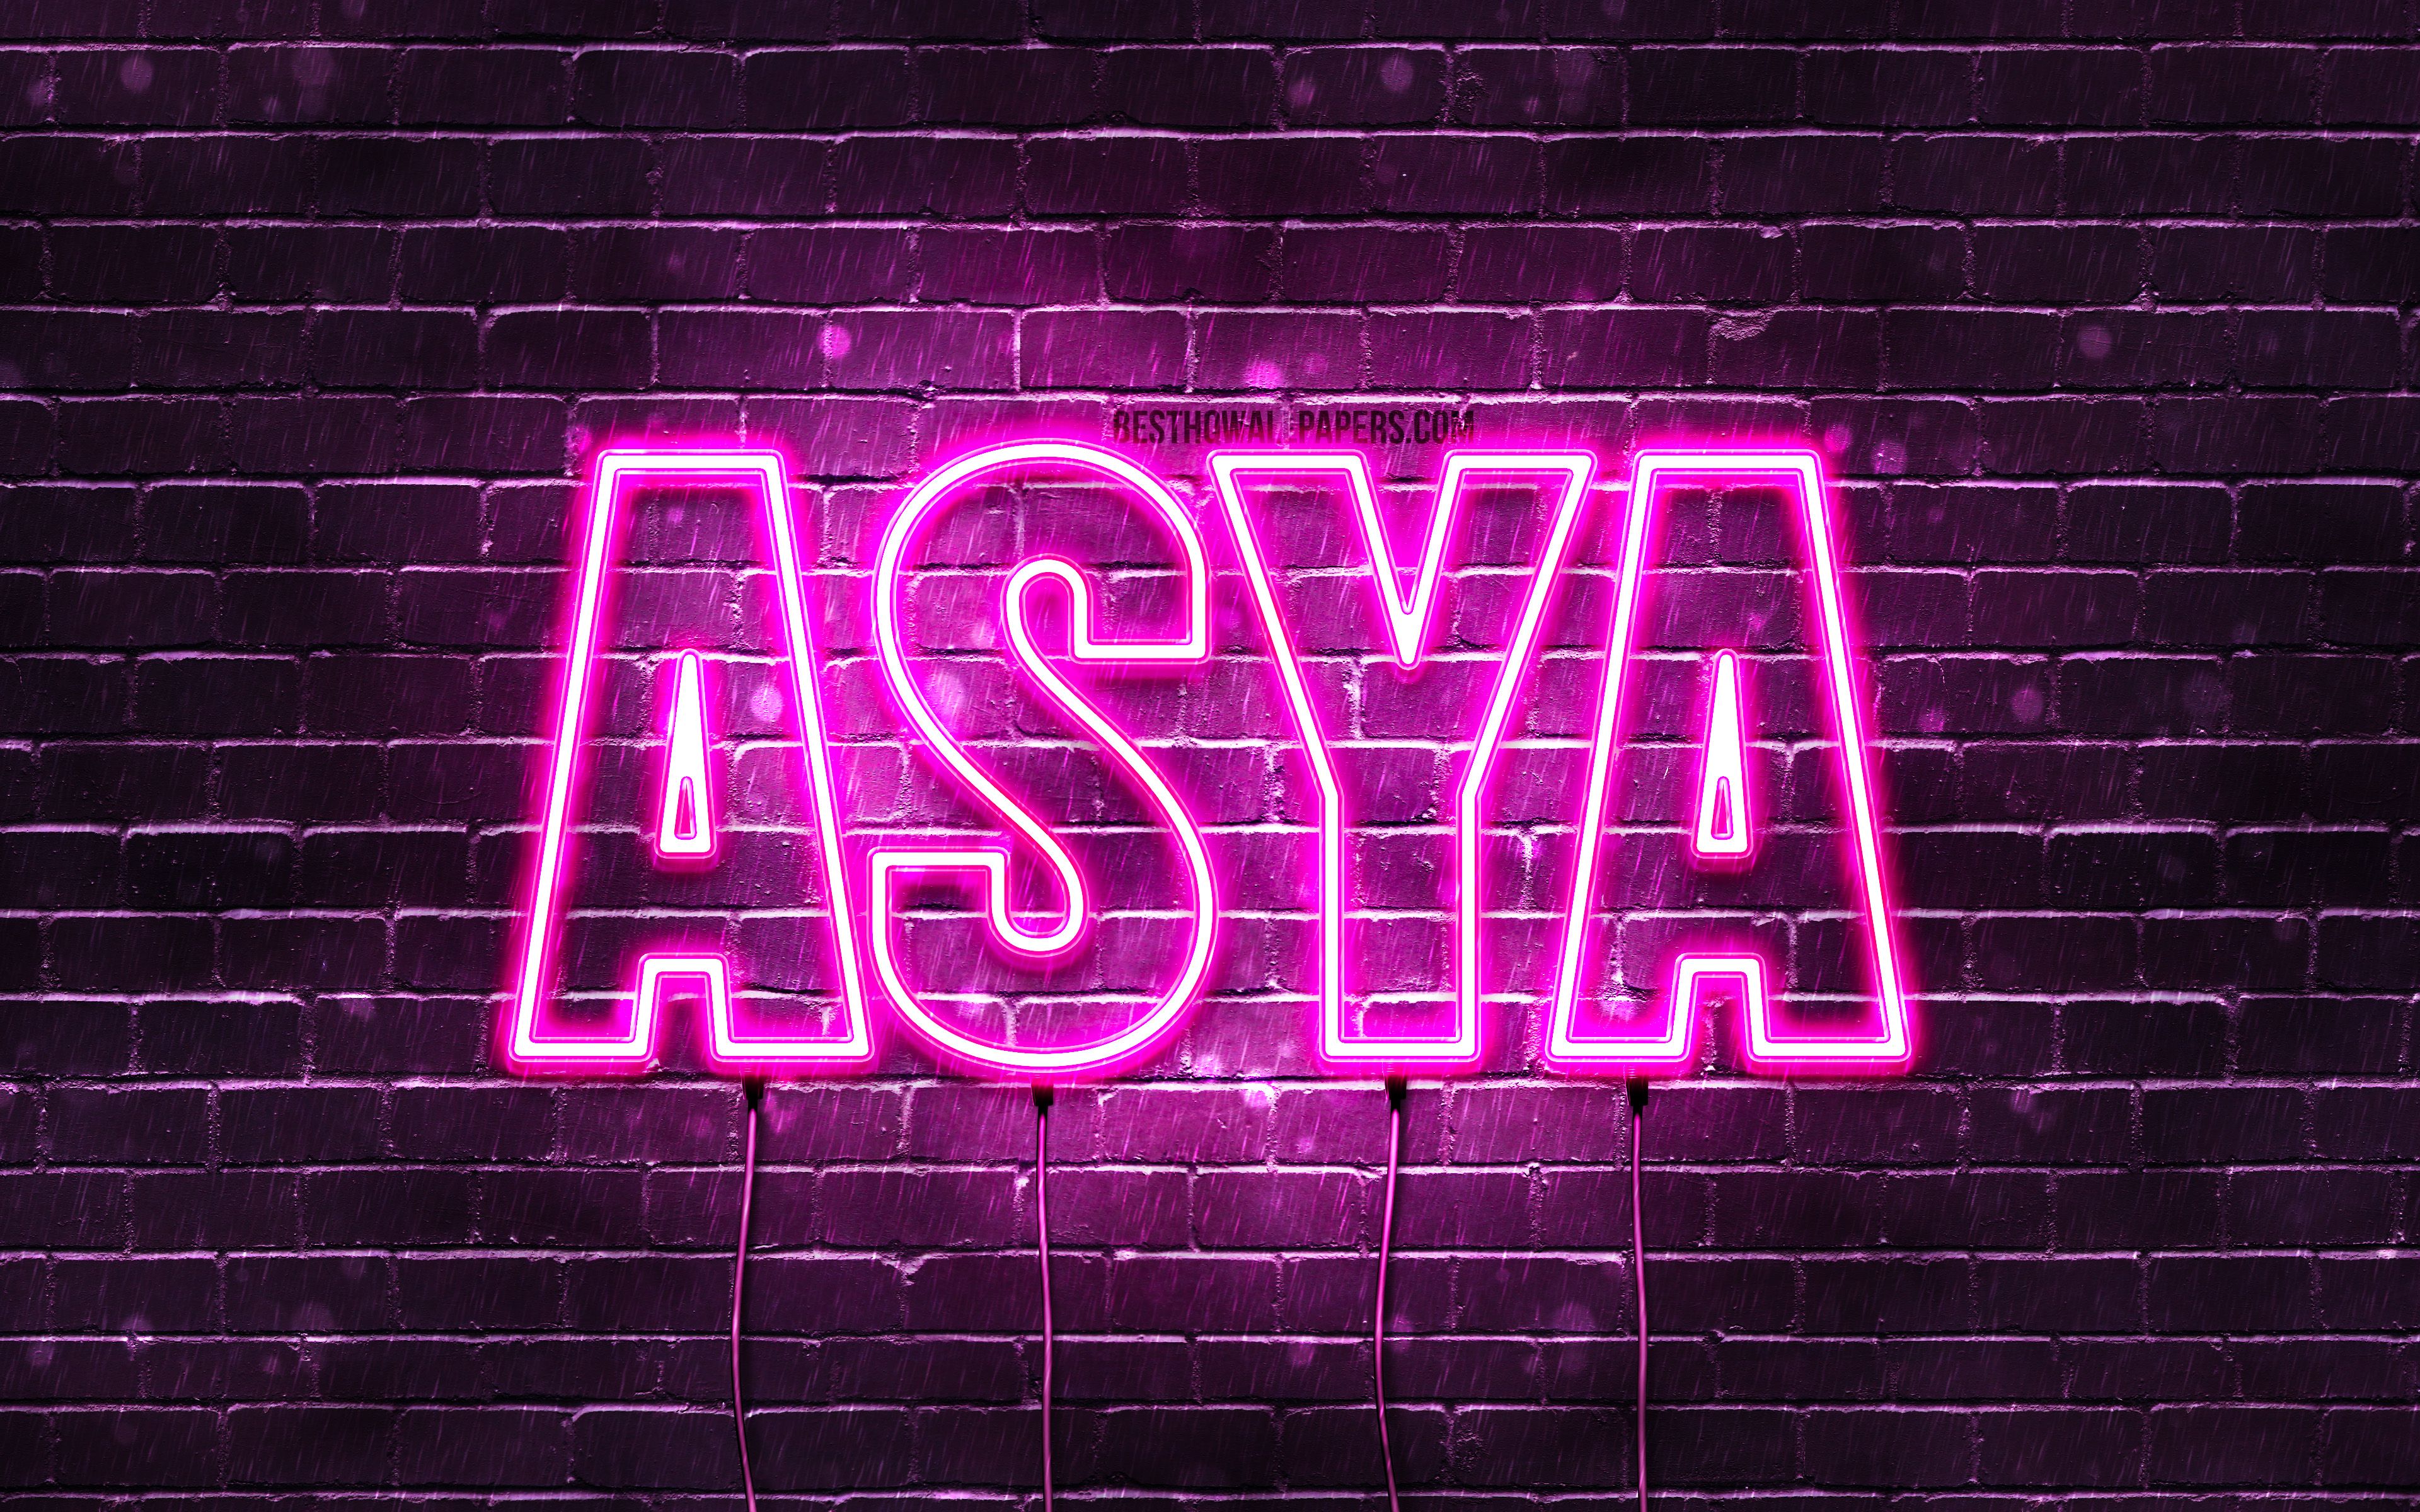 Download wallpaper Asya, 4k, wallpaper with names, female names, Asya name, purple neon lights, Happy Birthday Asya, popular turkish female names, picture with Asya name for desktop with resolution 3840x2400. High Quality